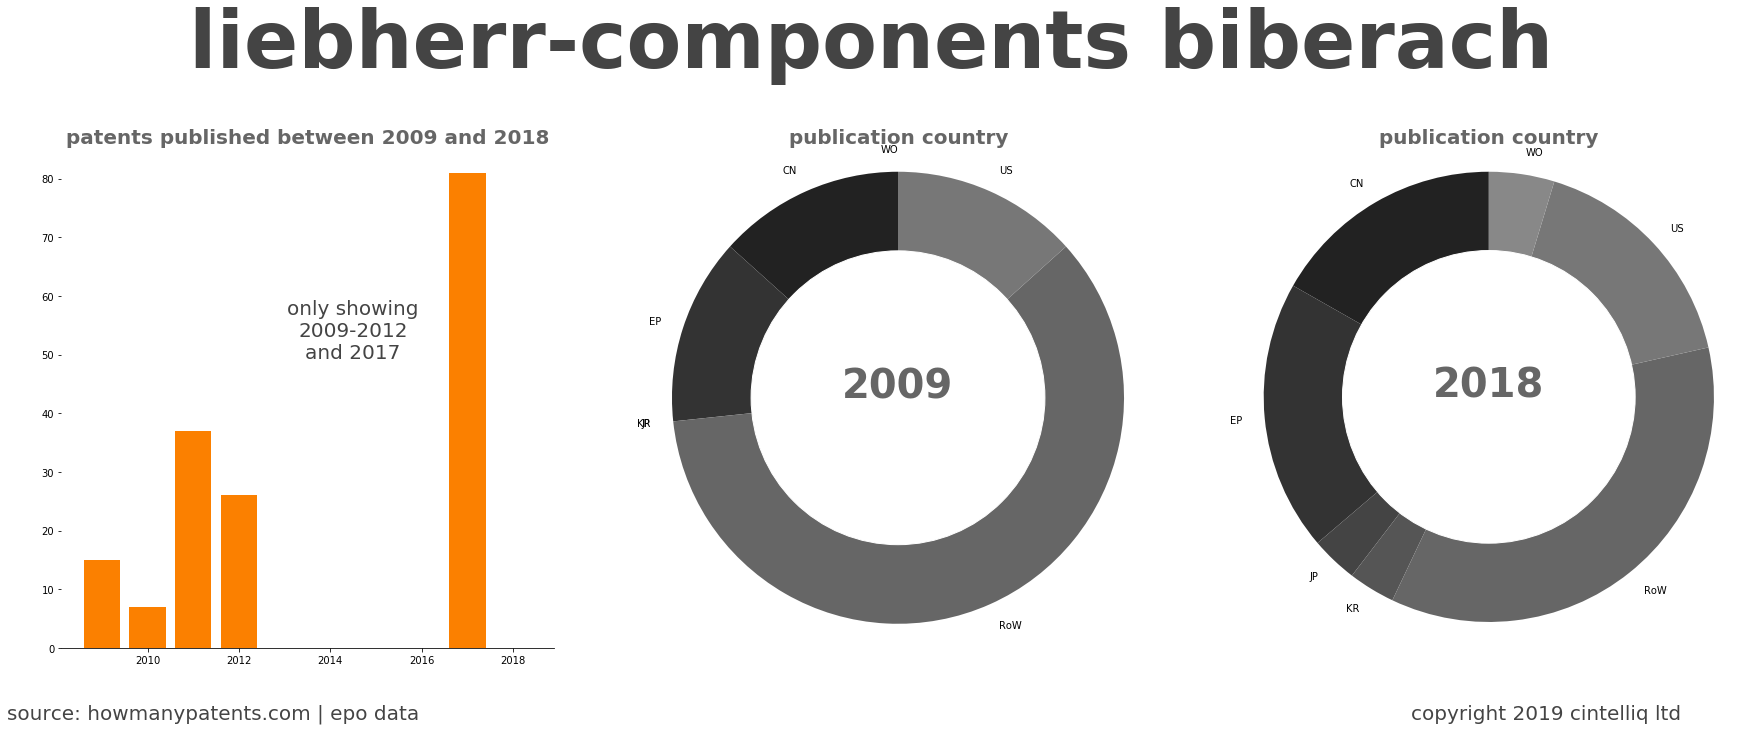 summary of patents for Liebherr-Components Biberach